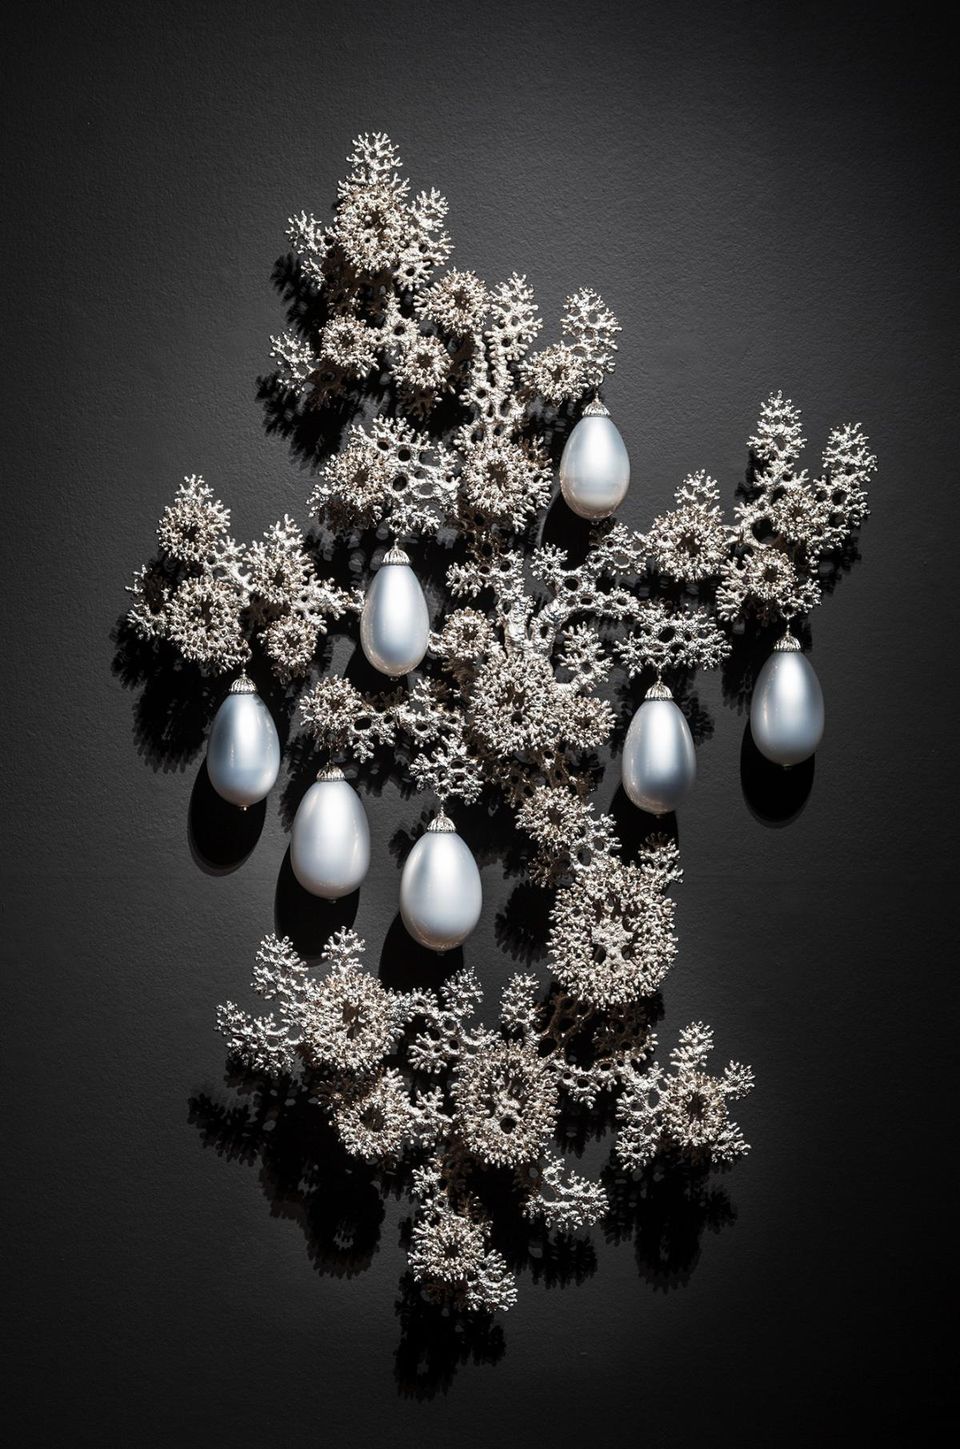 A photograph of a bronze and blown glass artwork with 7 silver balls hanging from a structure.